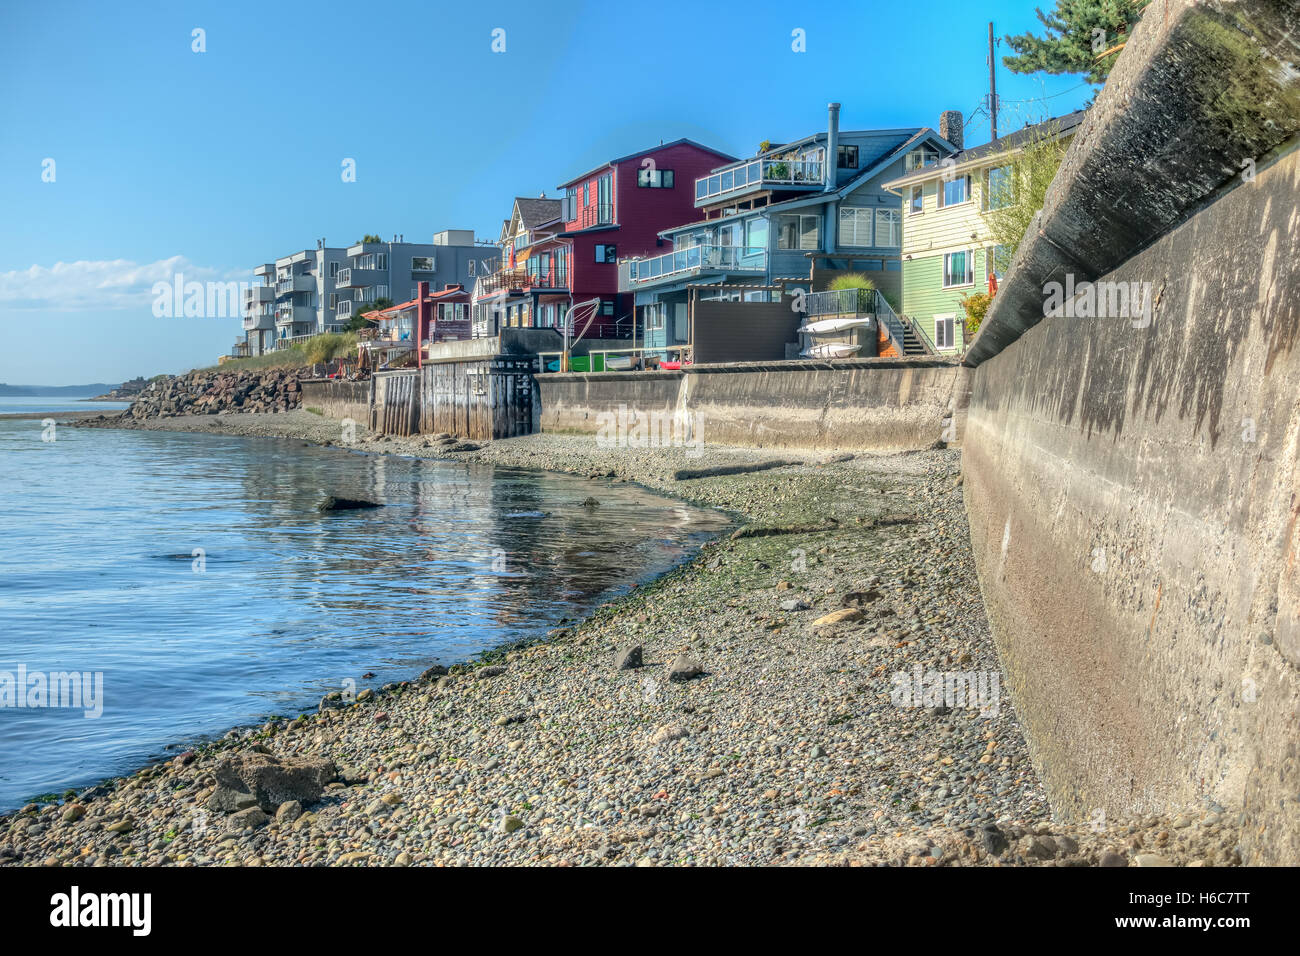 Residences sit above a seawall in West Seattle, Washington. HDR image. Stock Photo